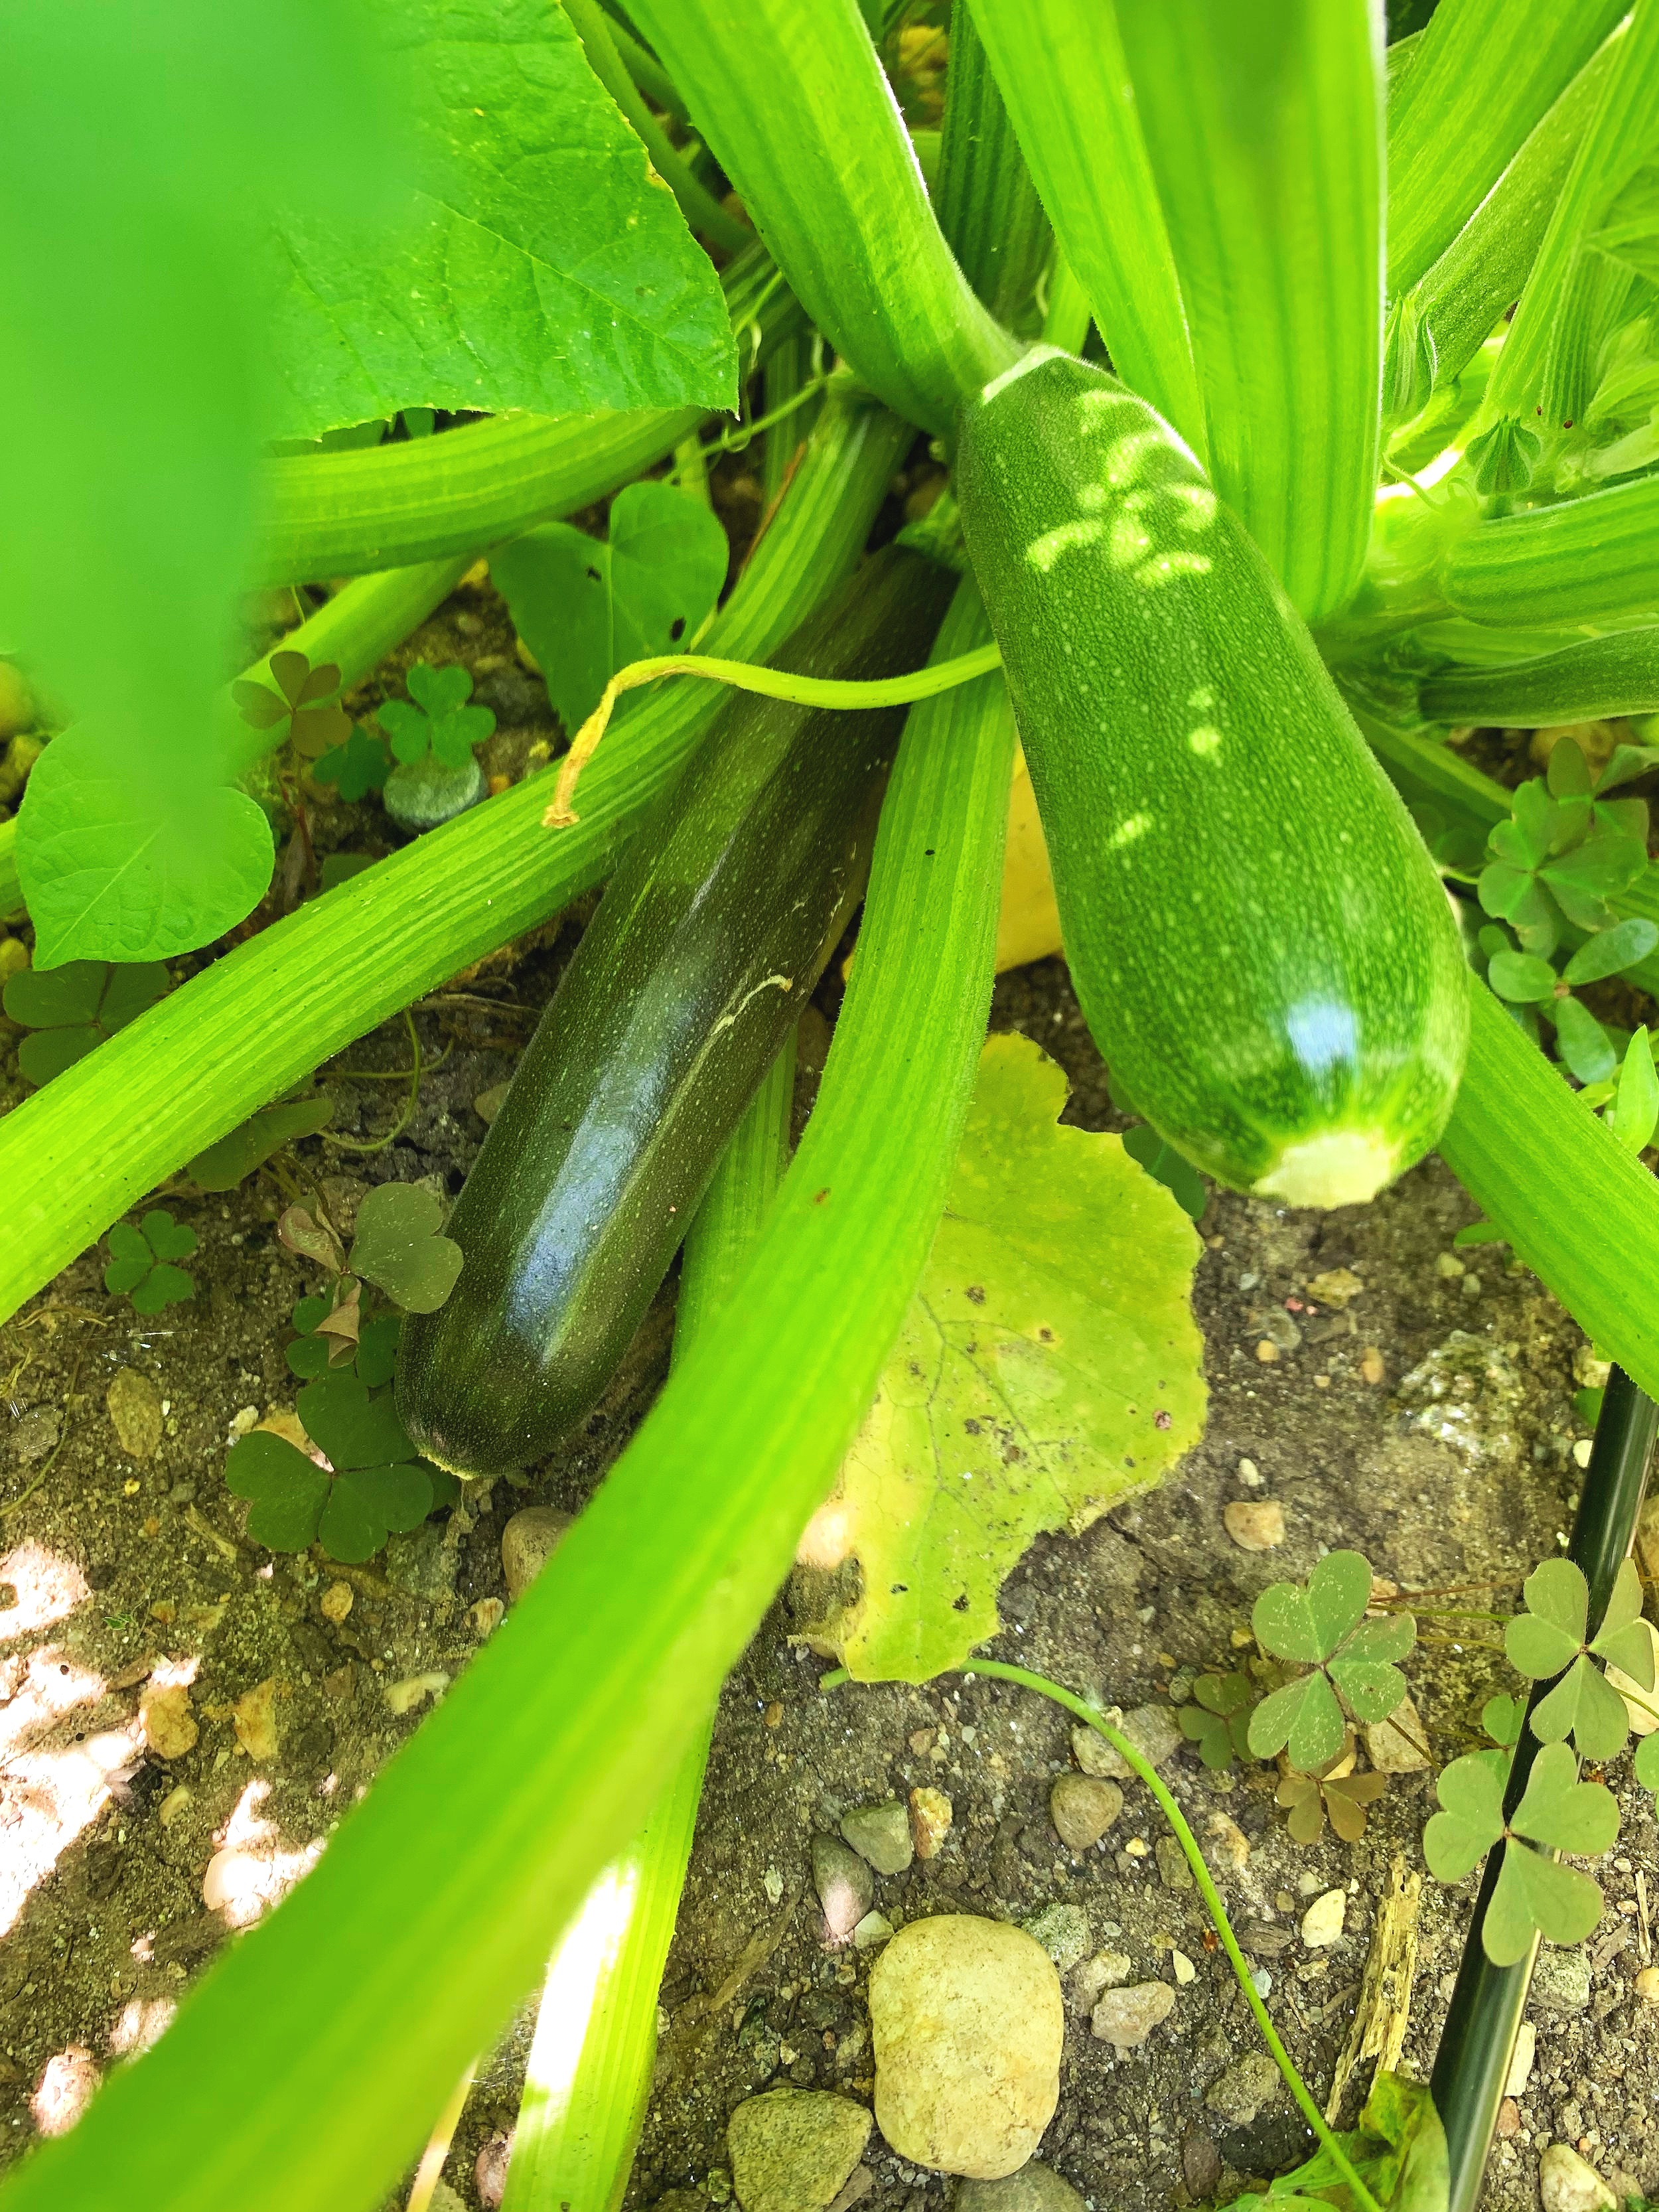 Summer squash growing big and juicy in the garden sun